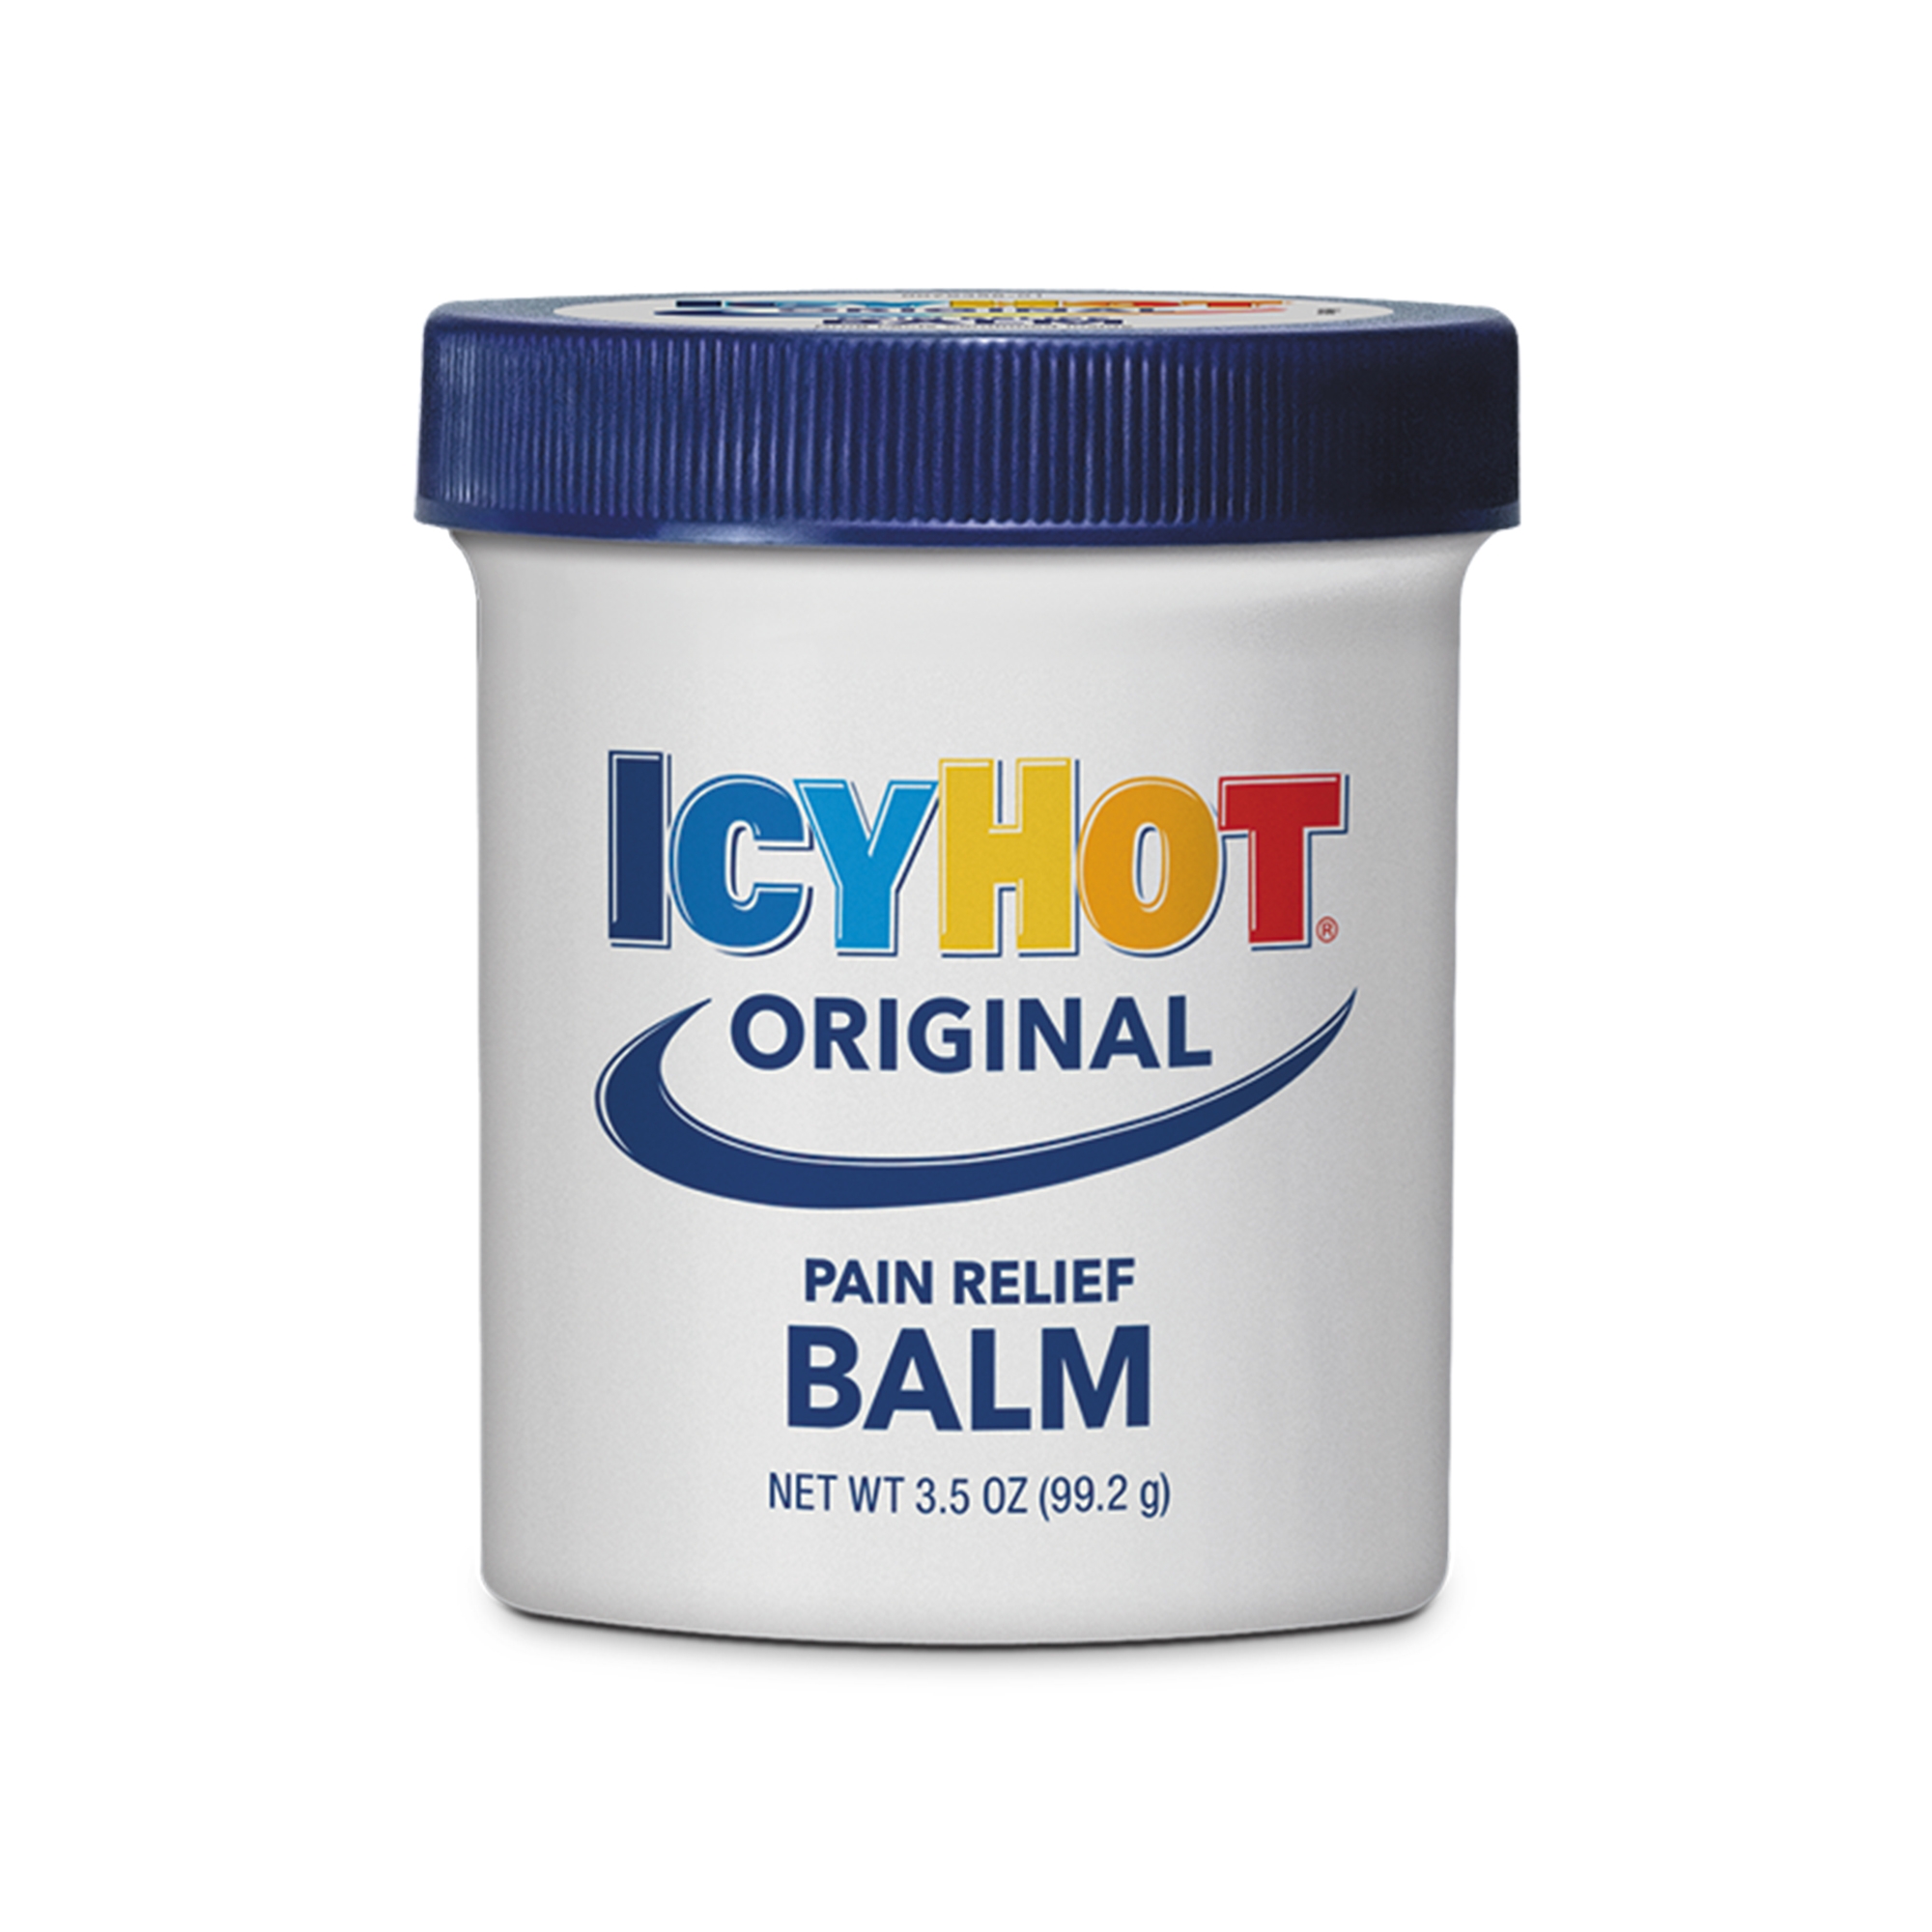 Icy Hot Original Extra Strength Topical Pain Reliever Balm and Numbing Muscle Rub Cream for Joint Pain Relief, 7.6% Menthol and 29% Methyl Salicylate, 3.5 oz - image 1 of 6